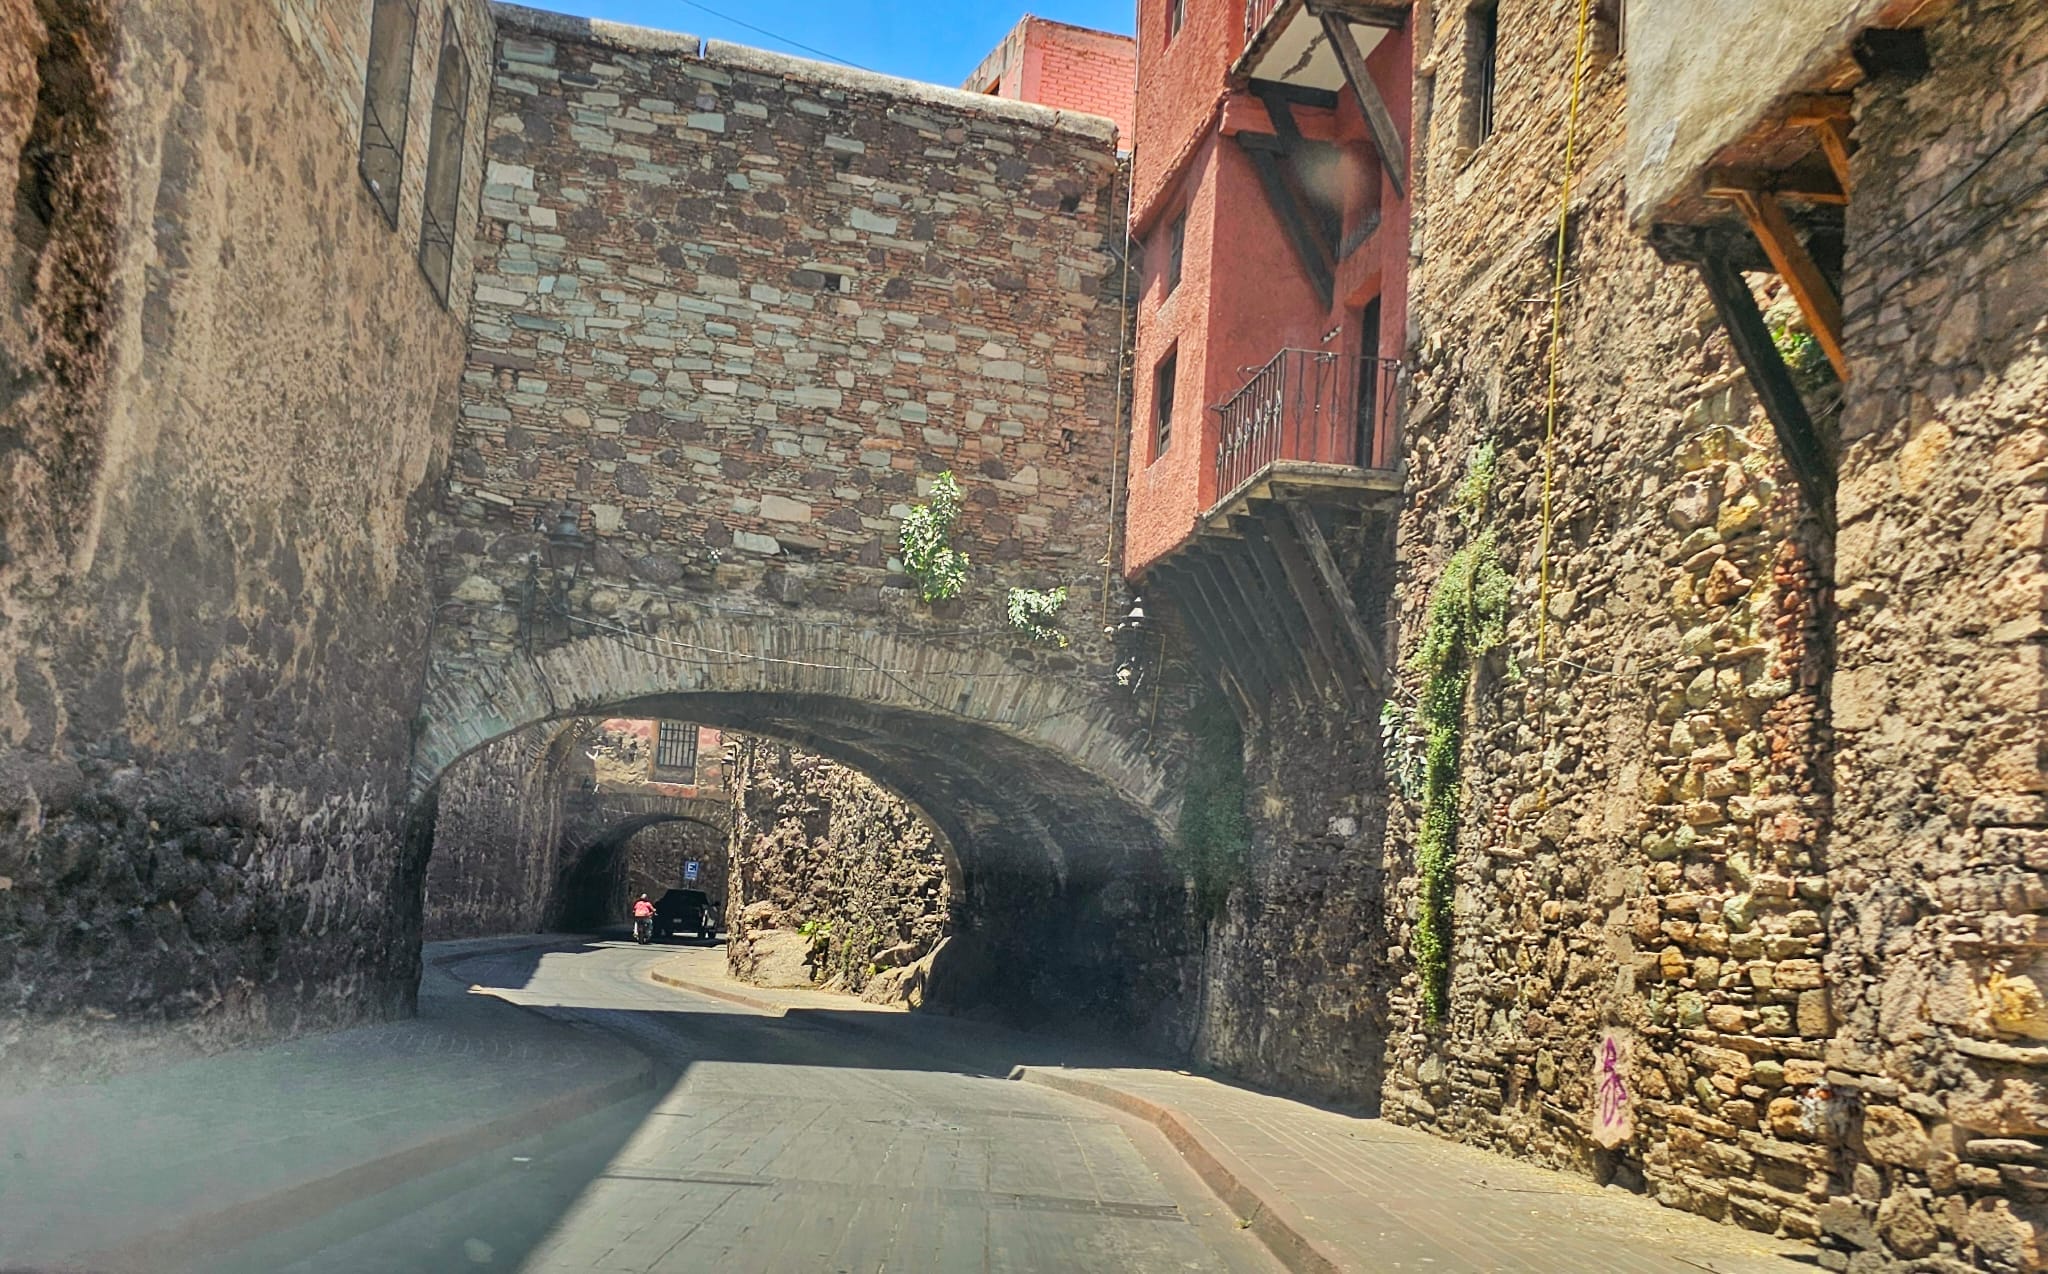 Guanajuato tunnels and arches compared to streets of San Miguel